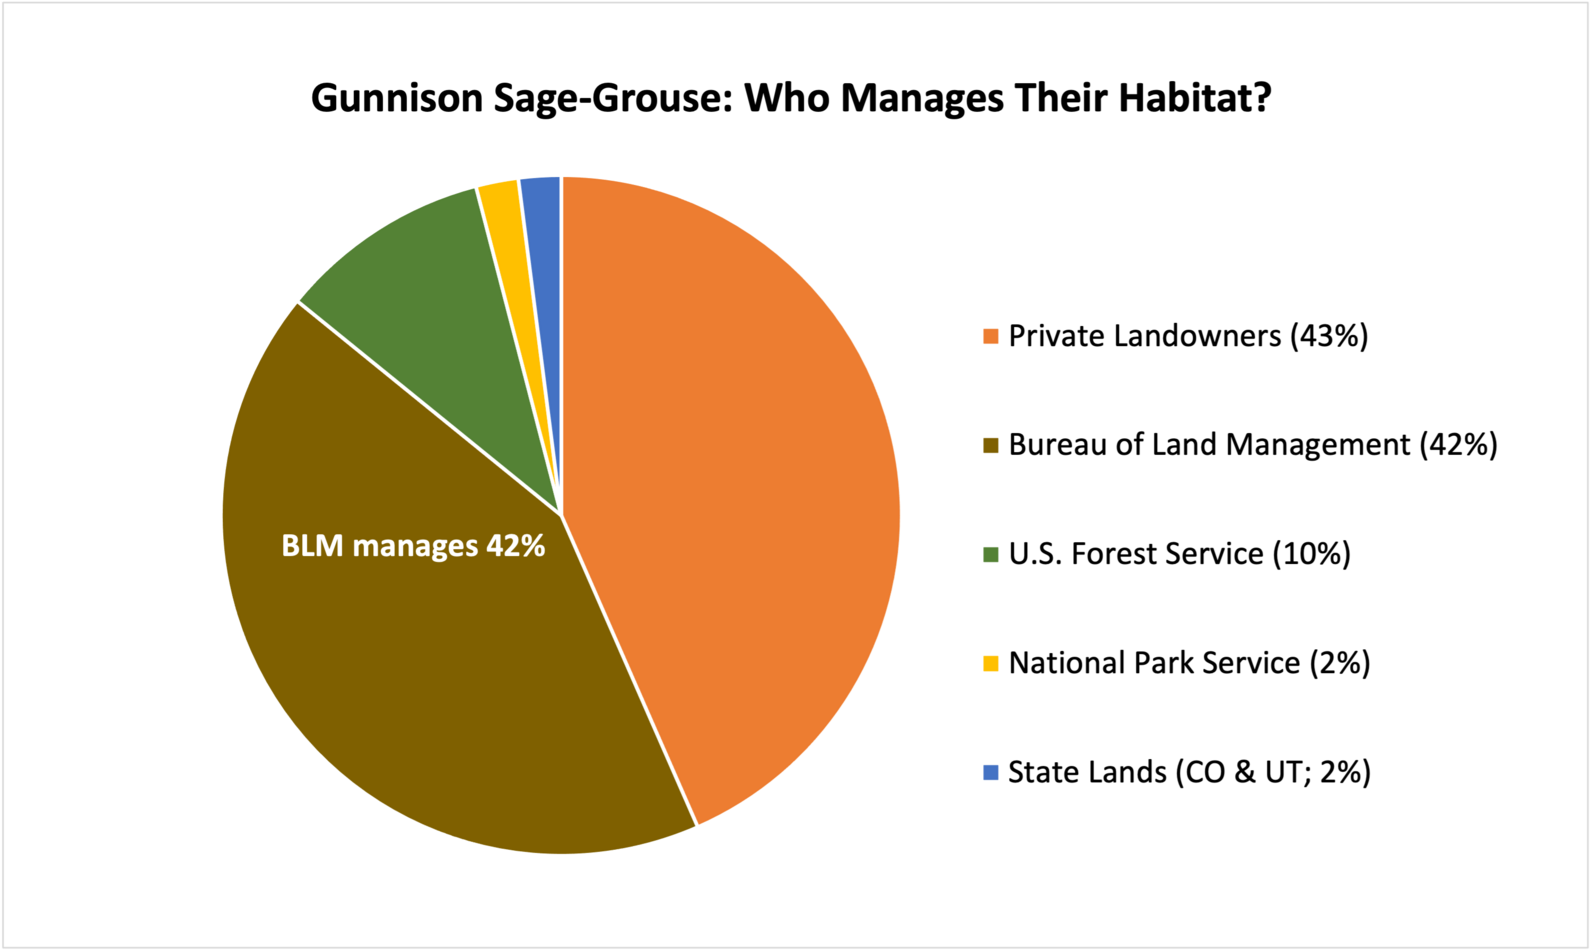 A pie chart showing the management of Gunnison Sage-Grouse habitat.